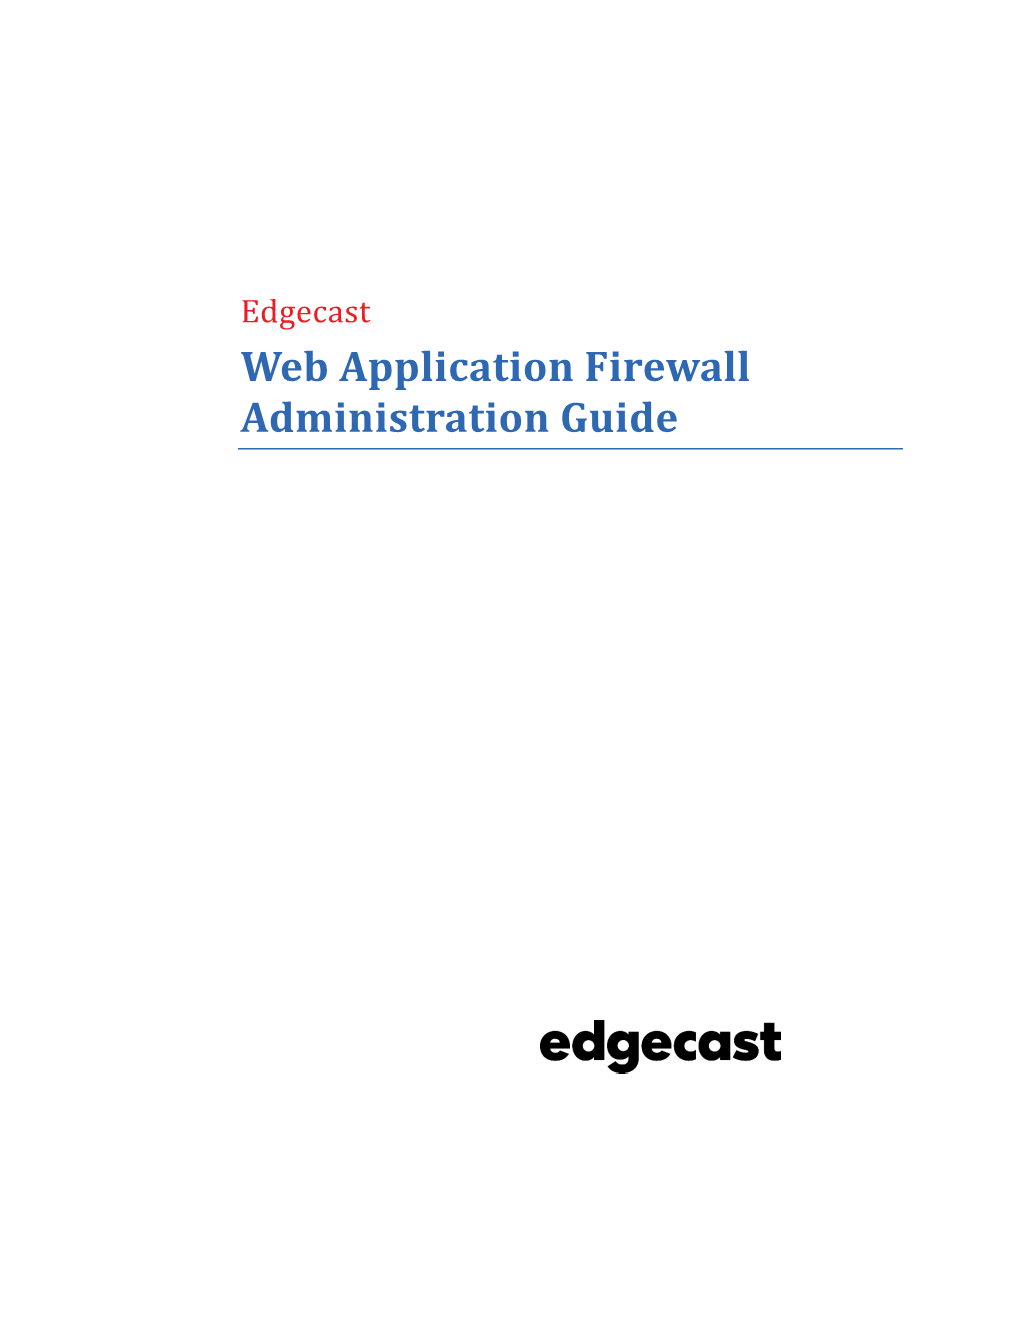 Web Application Firewall Administration Guide